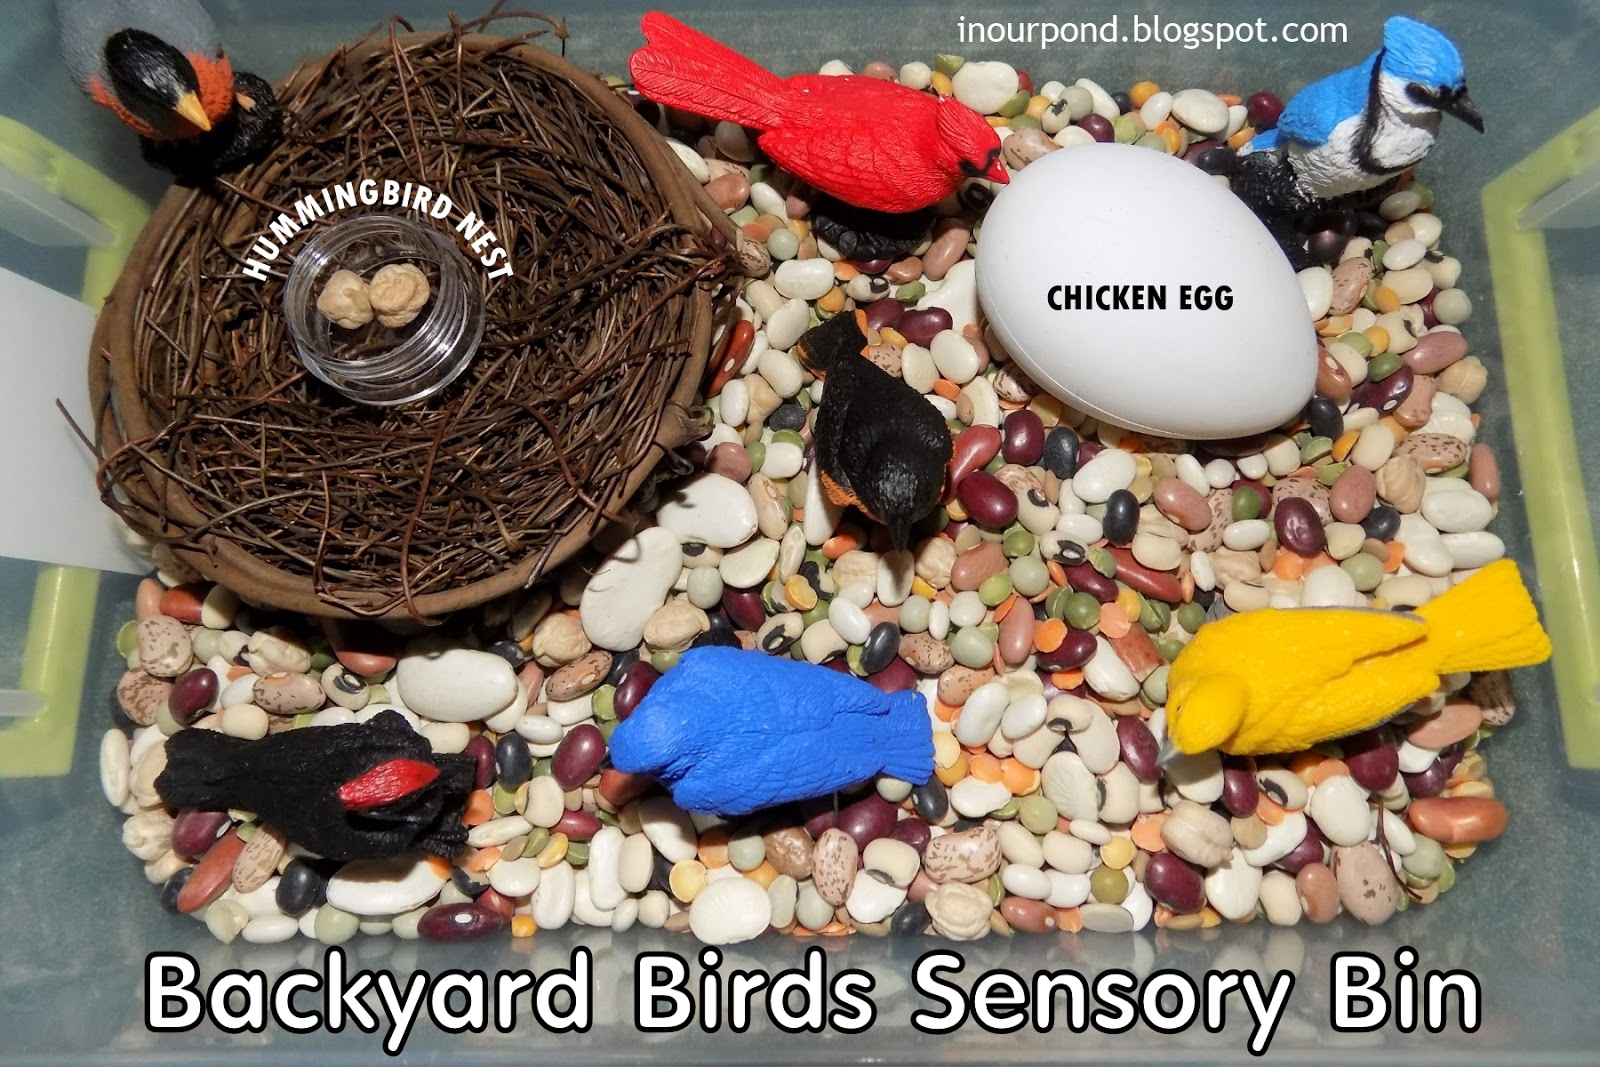 Birds and their Nest Sensory Tray for Preschoolers - Learning Step By Step